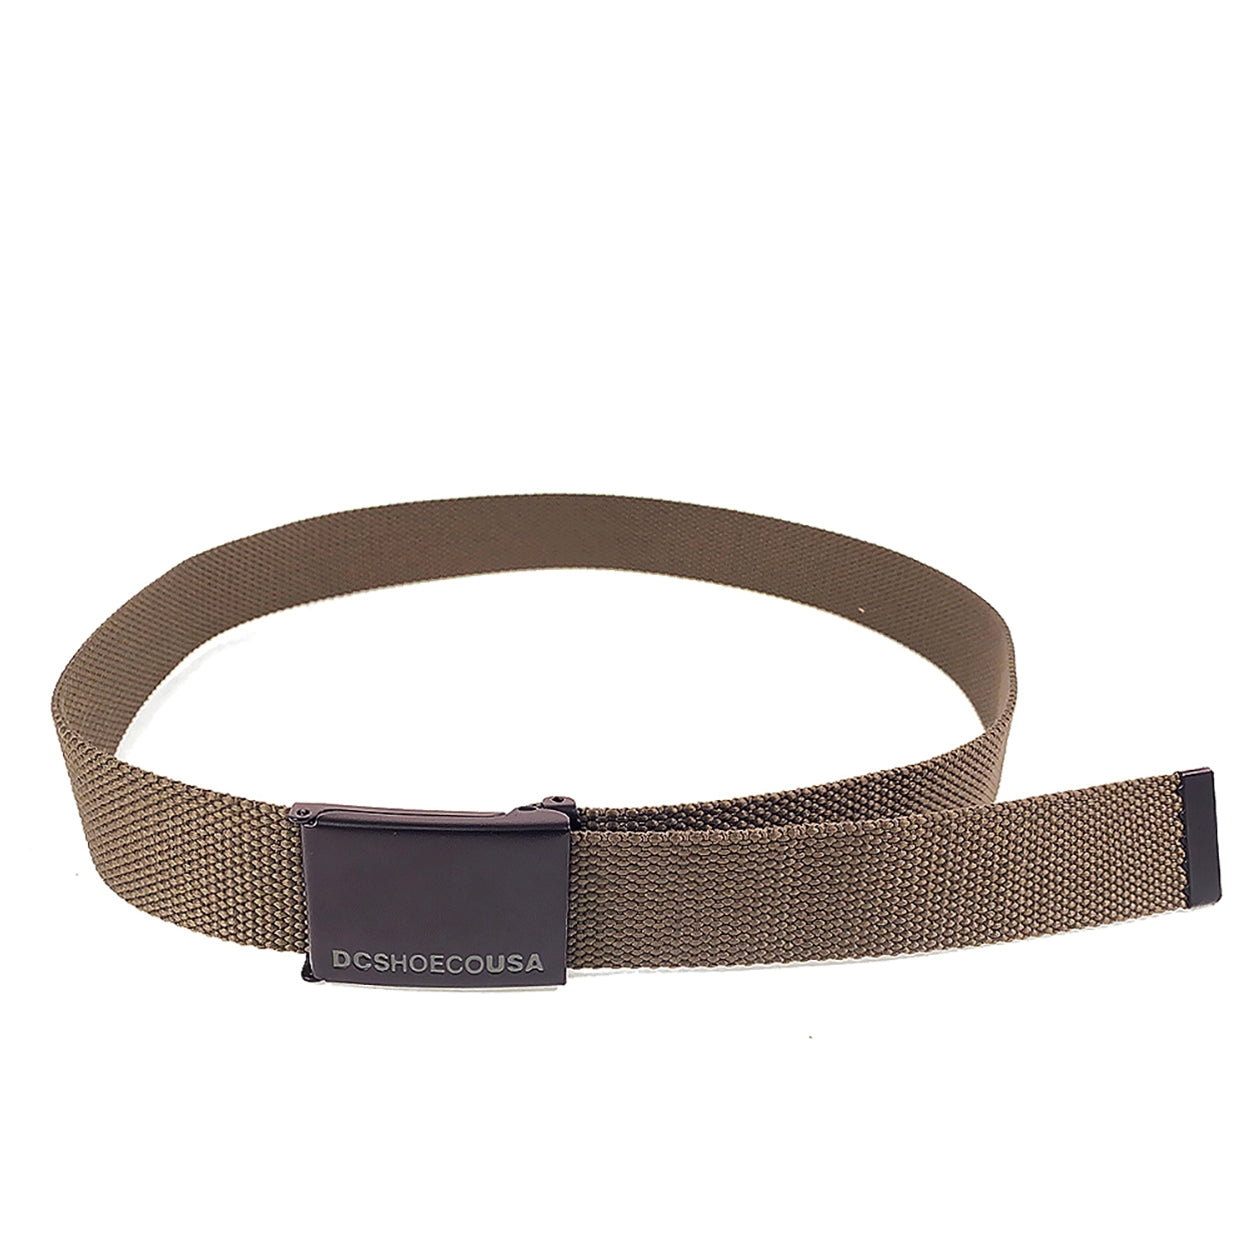 DC Shoes Web Belt 2 - Ivy Green - One Size - Prime Delux Store